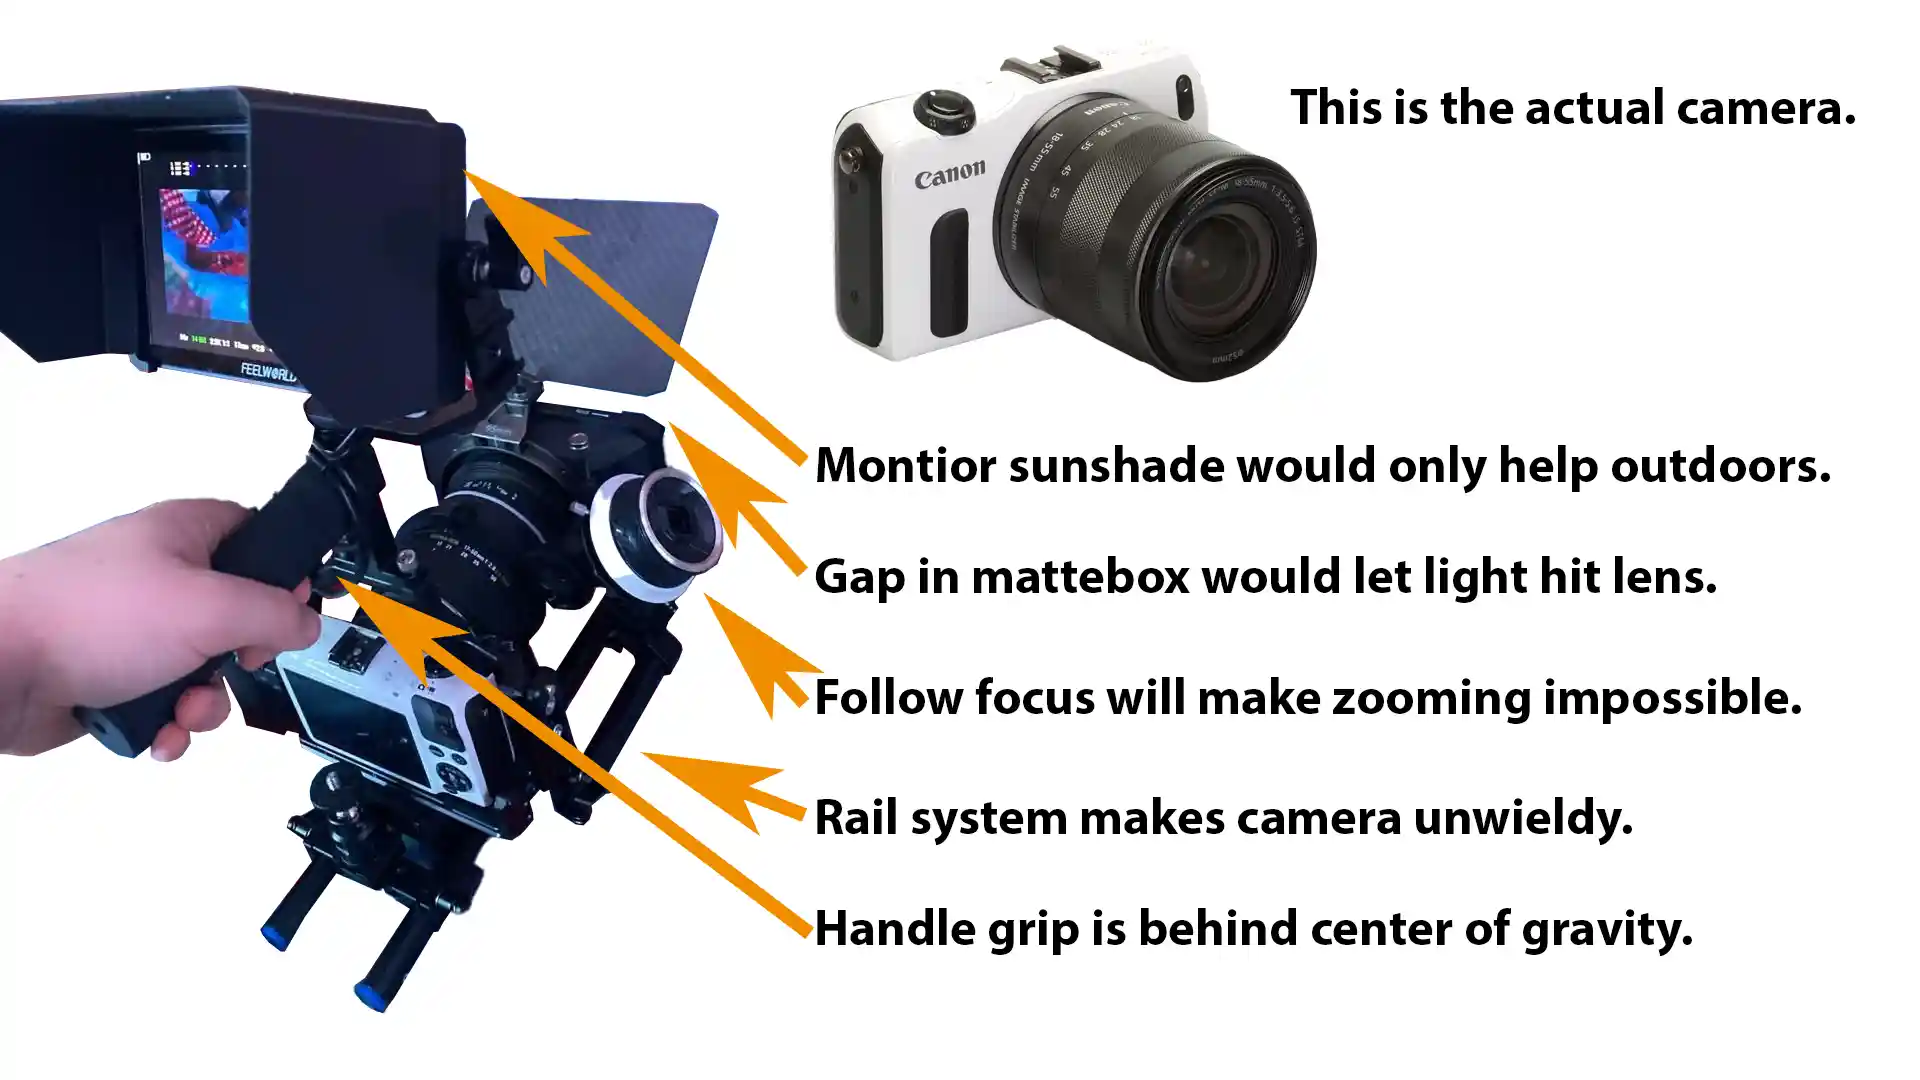 Canon camera with lots of accessories